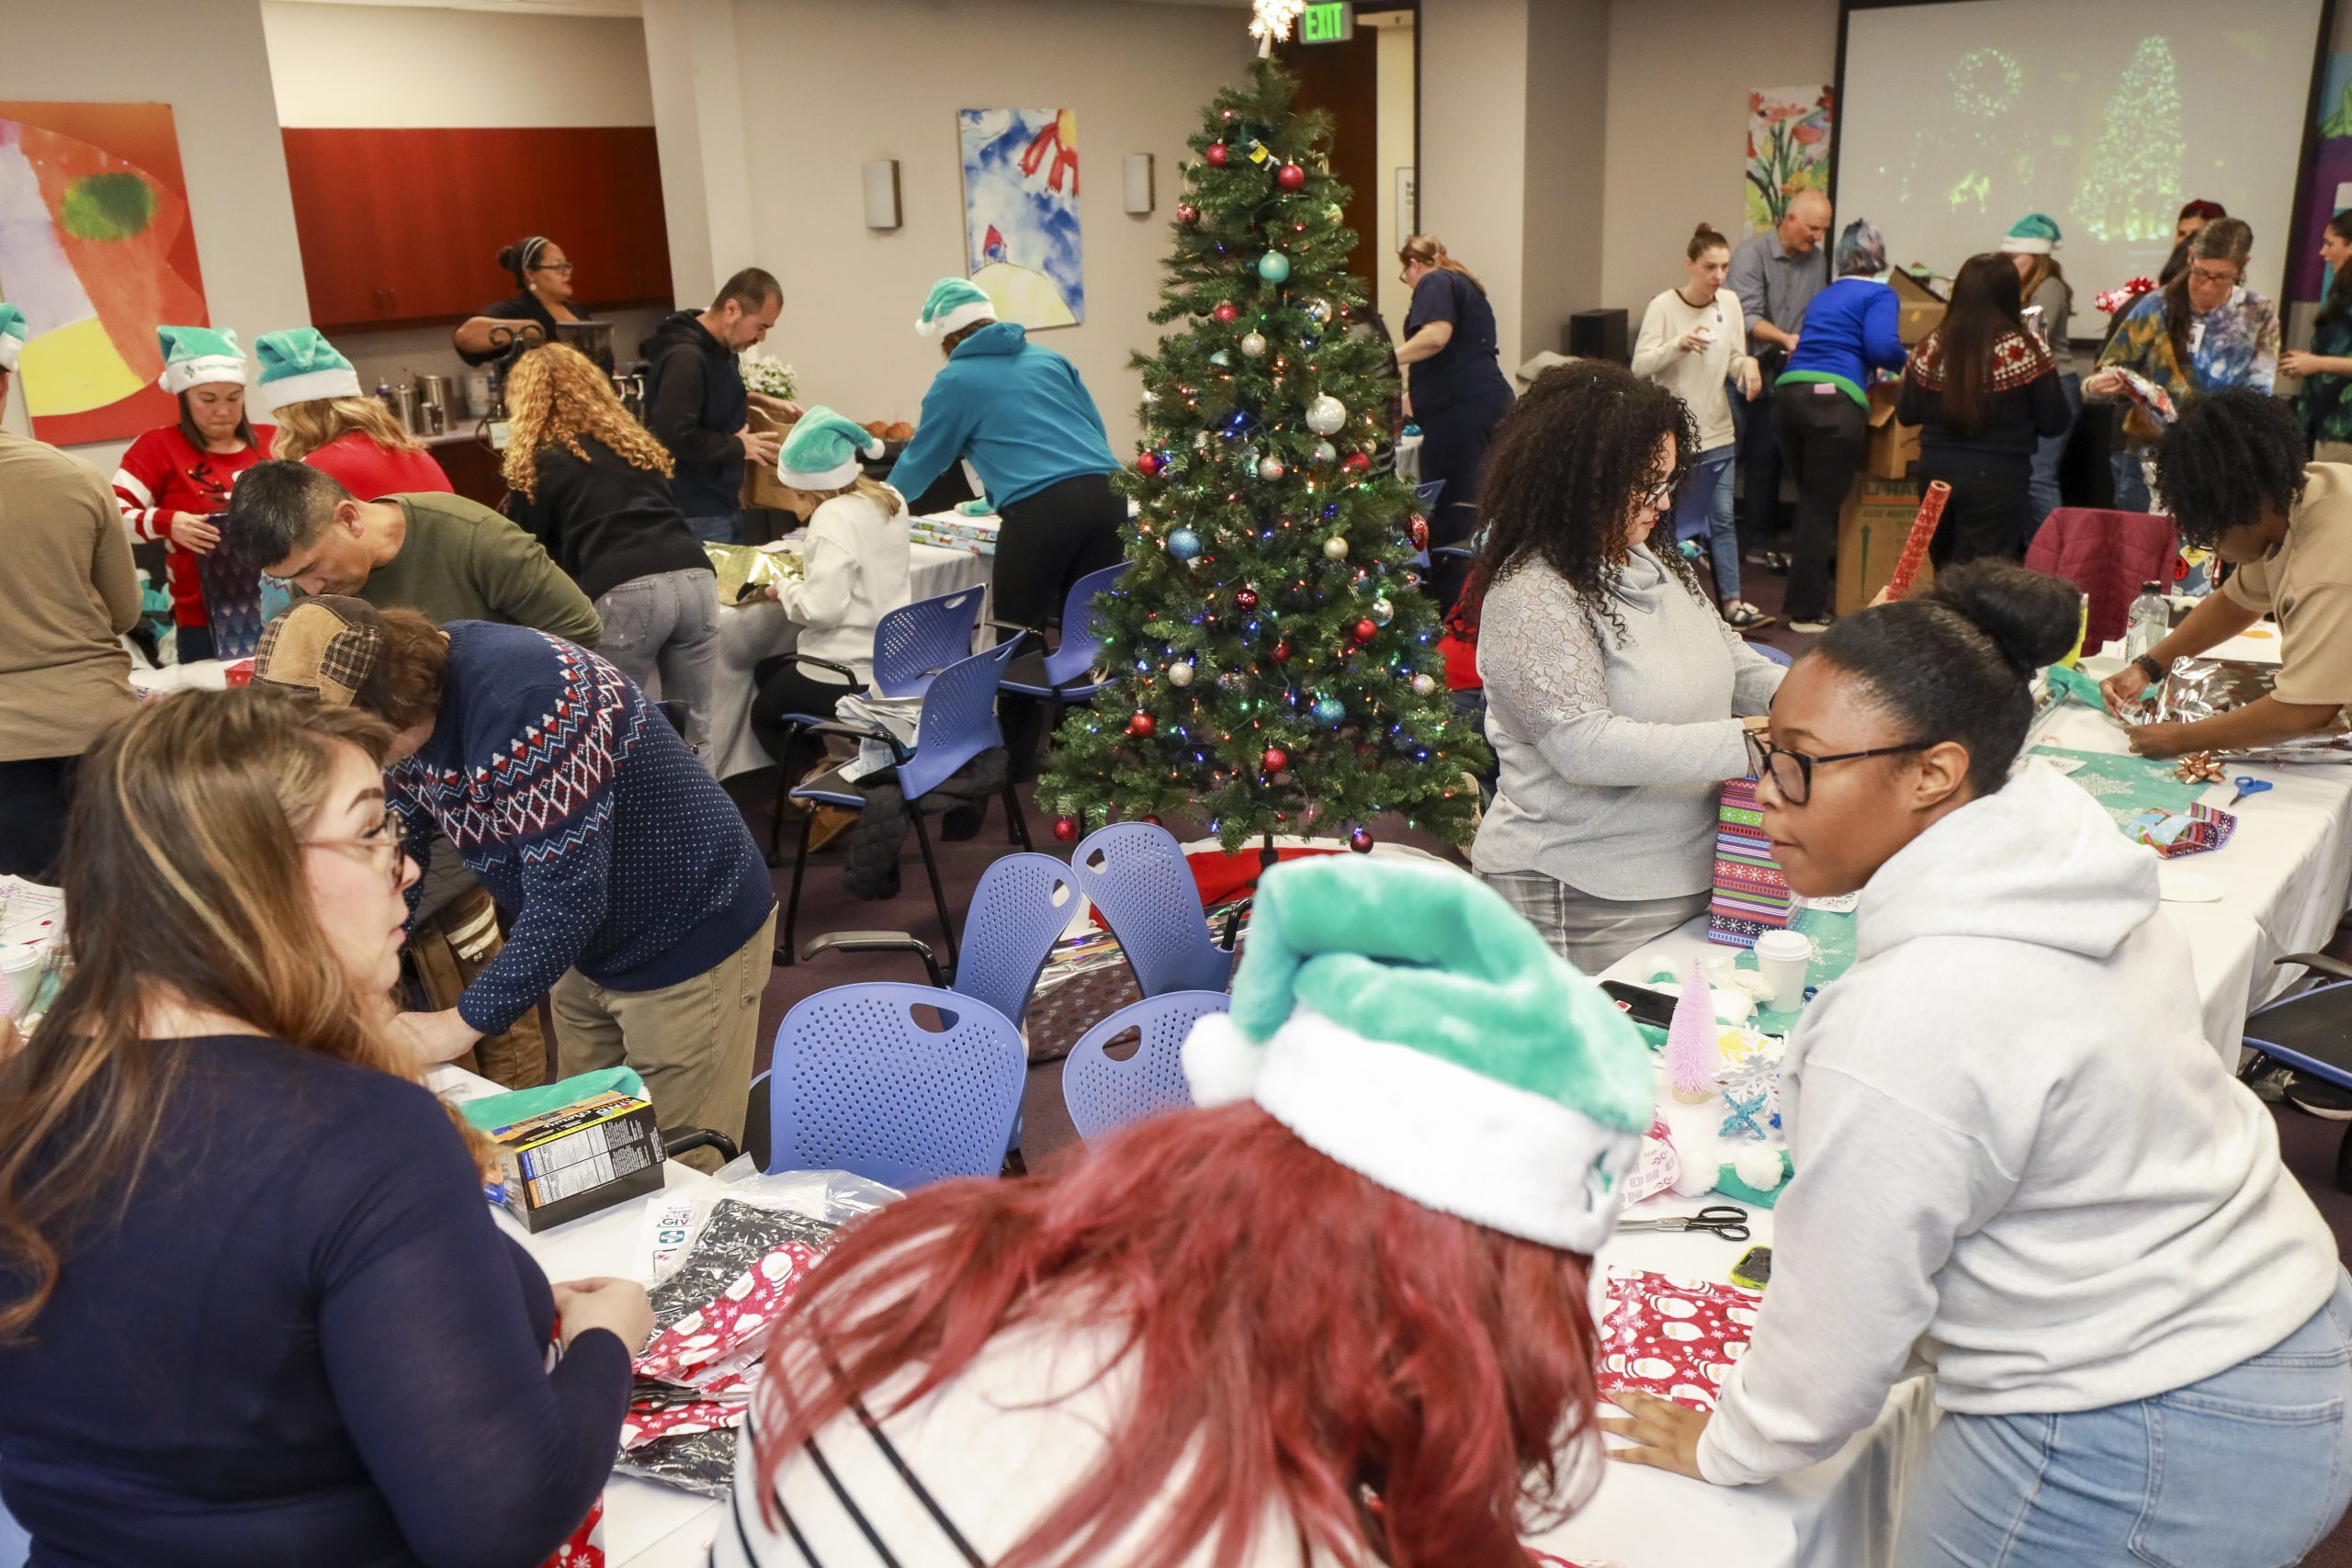 A large diverse group of adults wrap gifts in a conference room decorated for the winter holidays with a Christmas tree in the center of the room